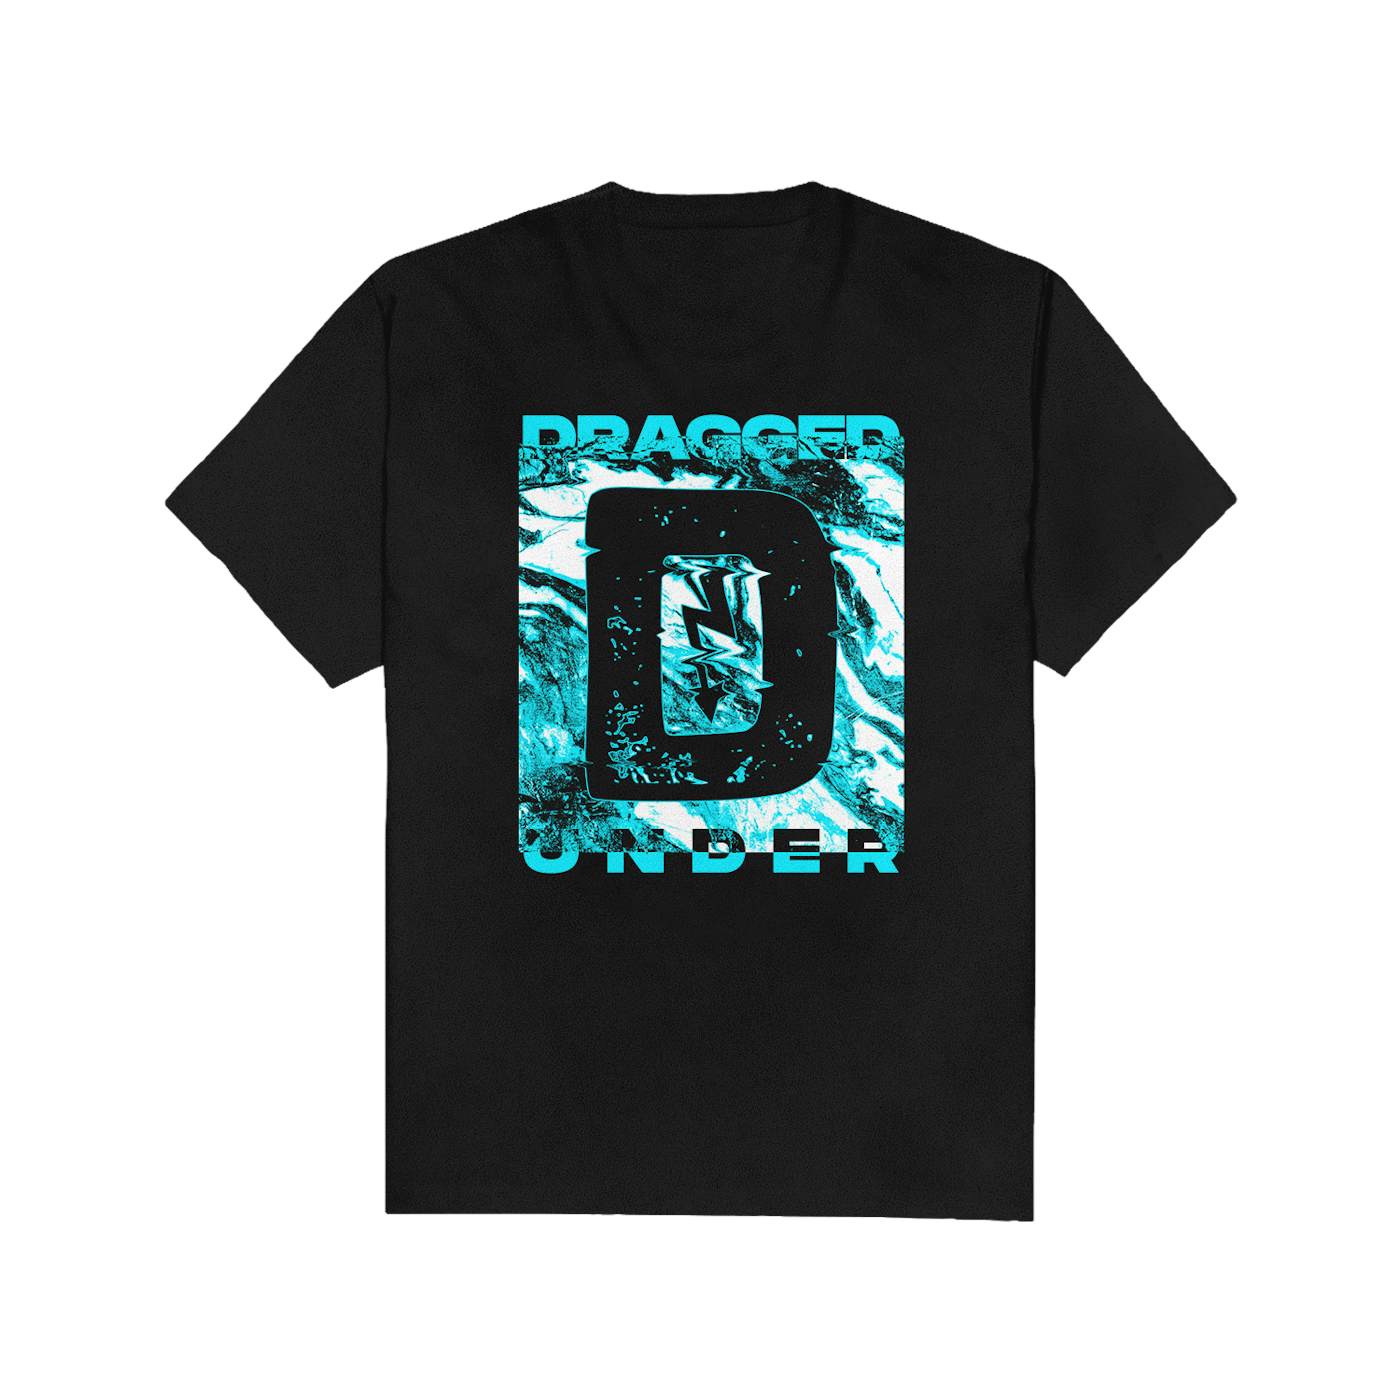 Dragged Under - Glitched Tee